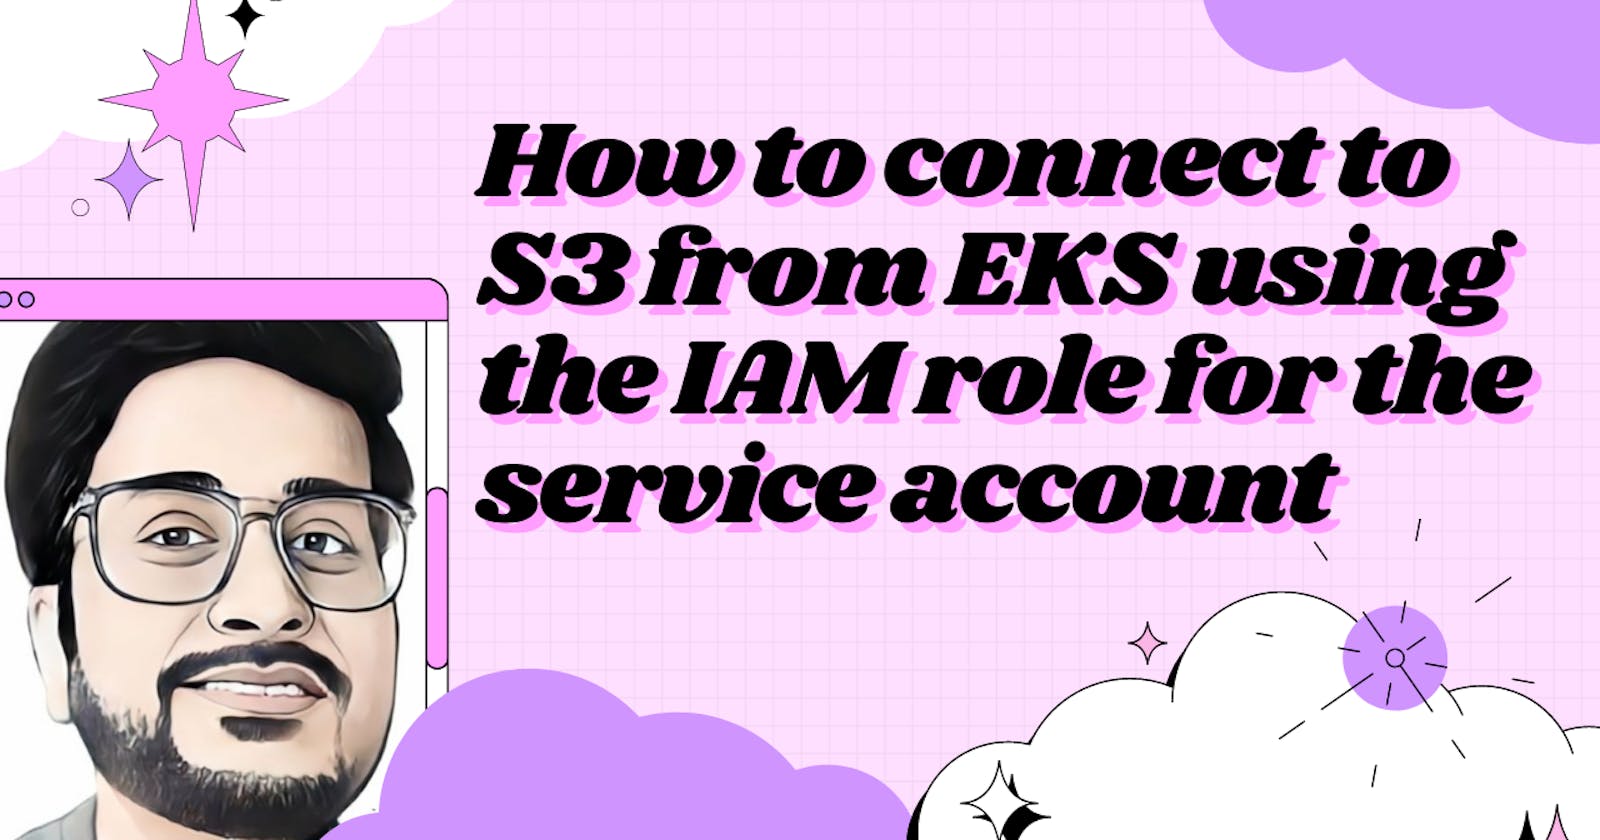 How to connect to S3 from EKS using the IAM role for the service account